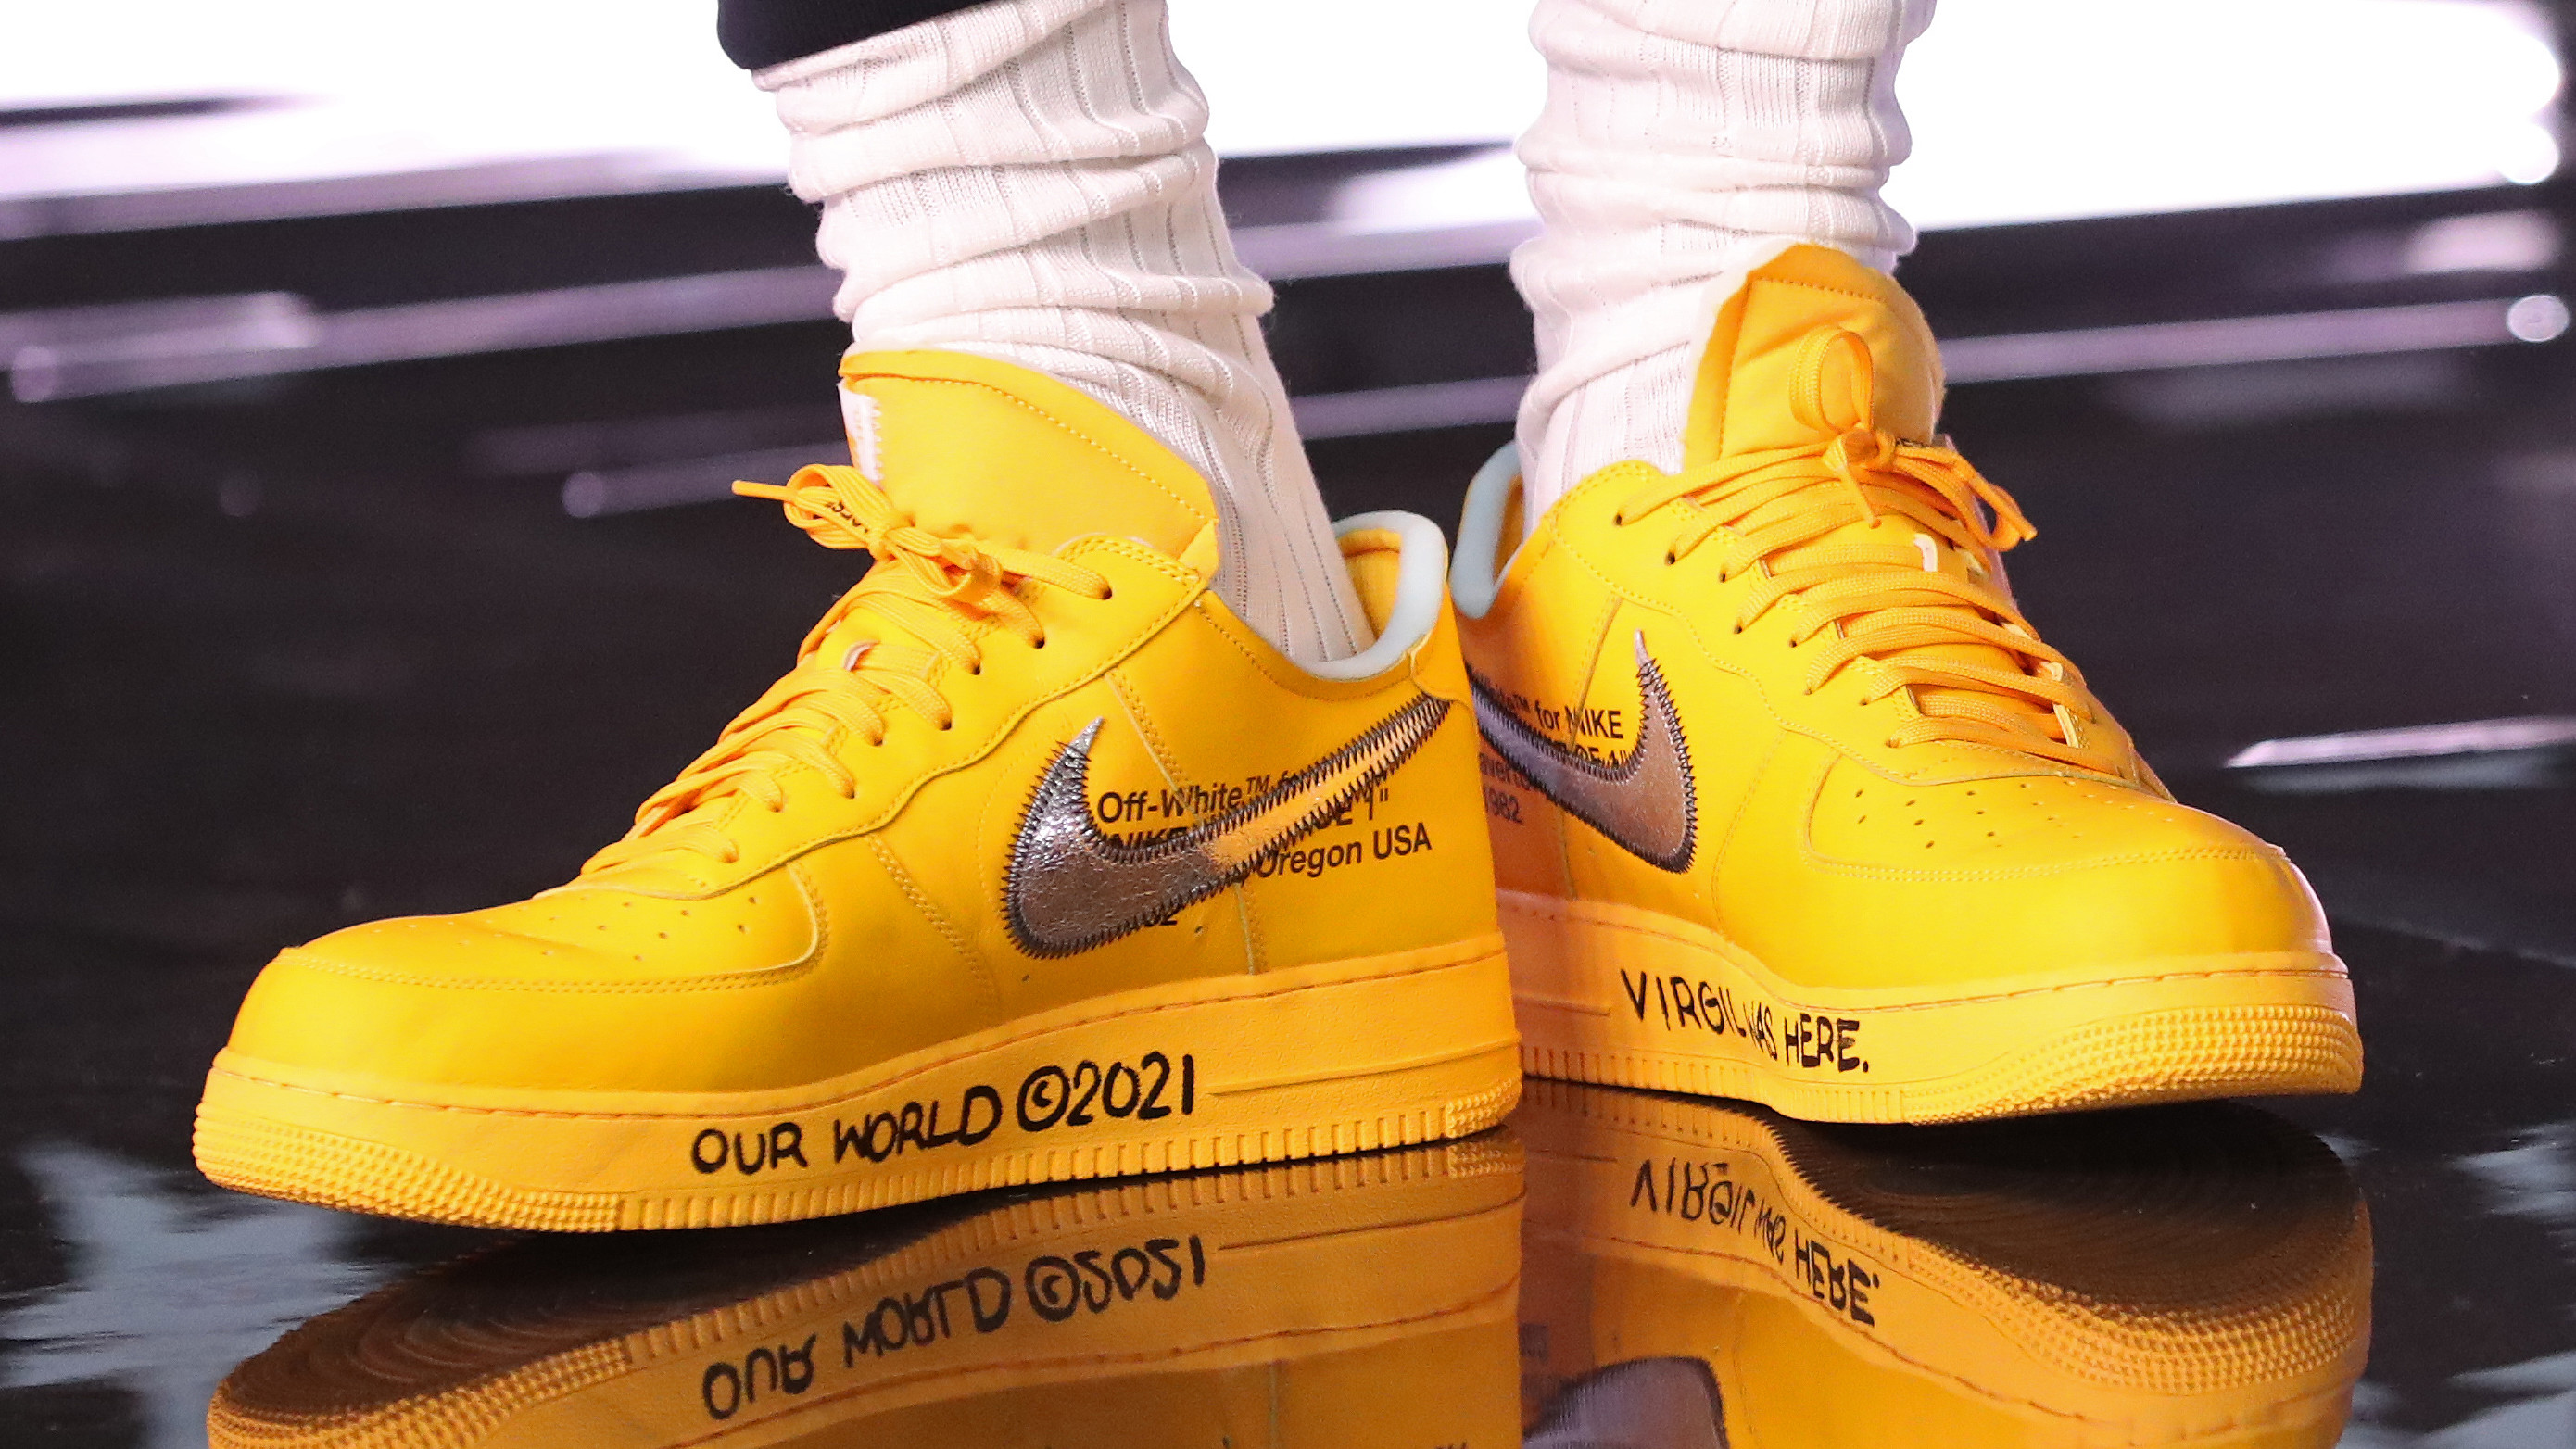 LV Nike Air Force 1 Low By Virgil Abloh Gold. How is the quality